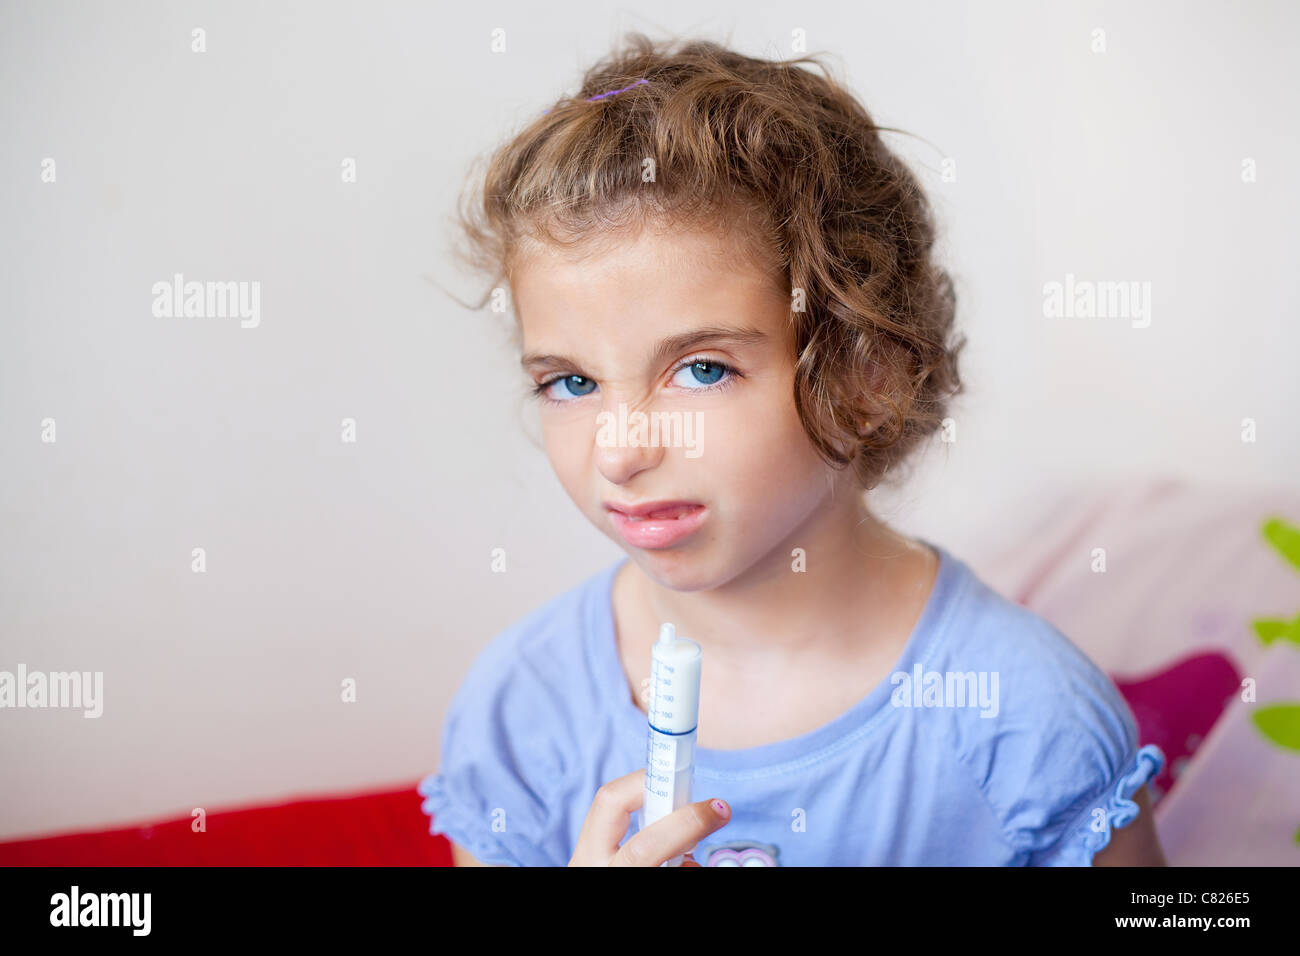 Unhappy kid girl with syringe medicine dose funny expression Stock Photo